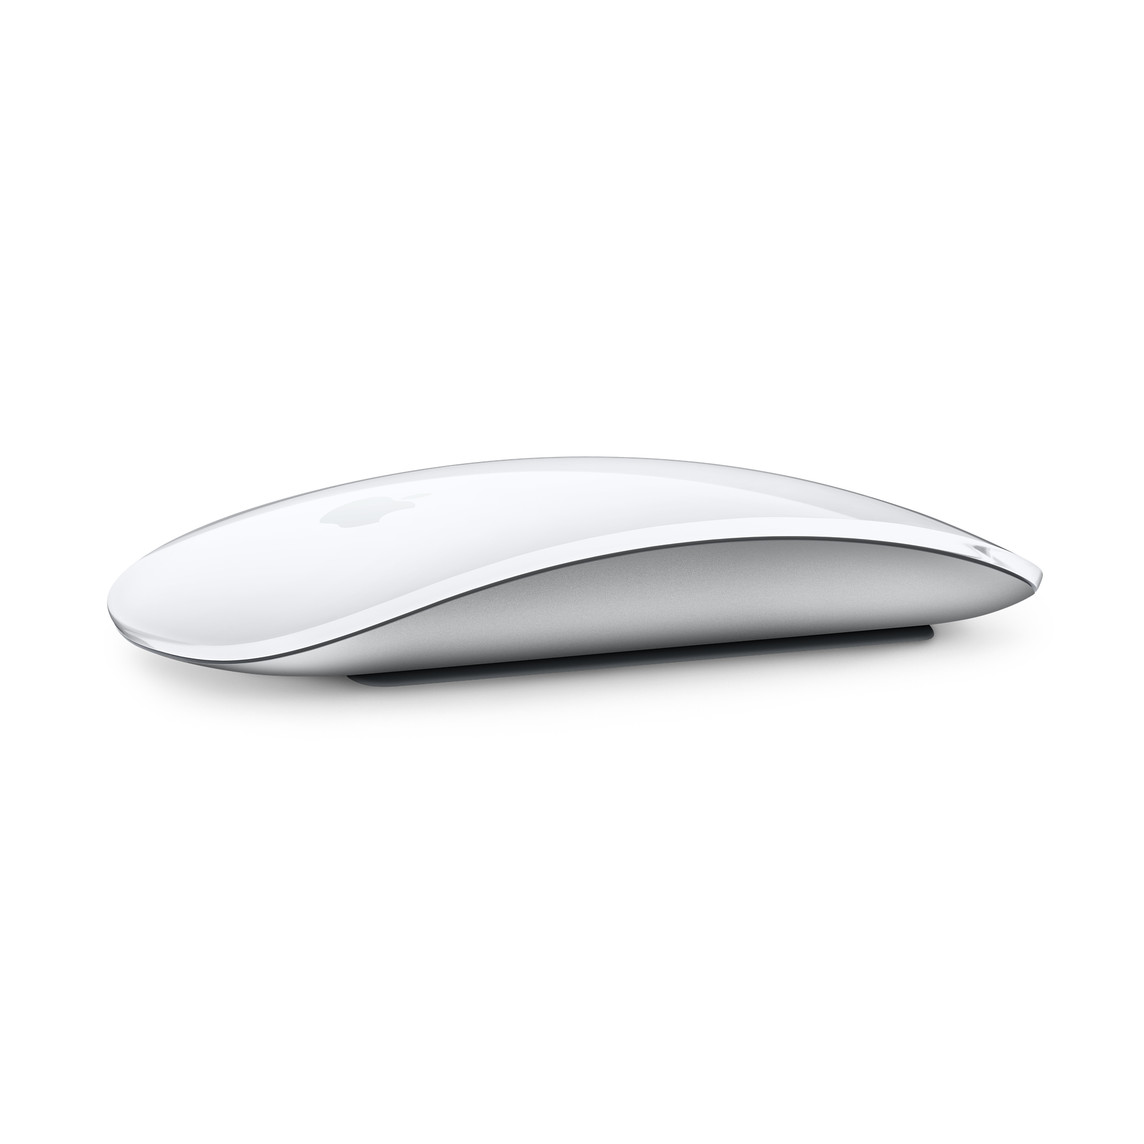 Picture of Apple Magic Mouse - White Multi-Touch Surface